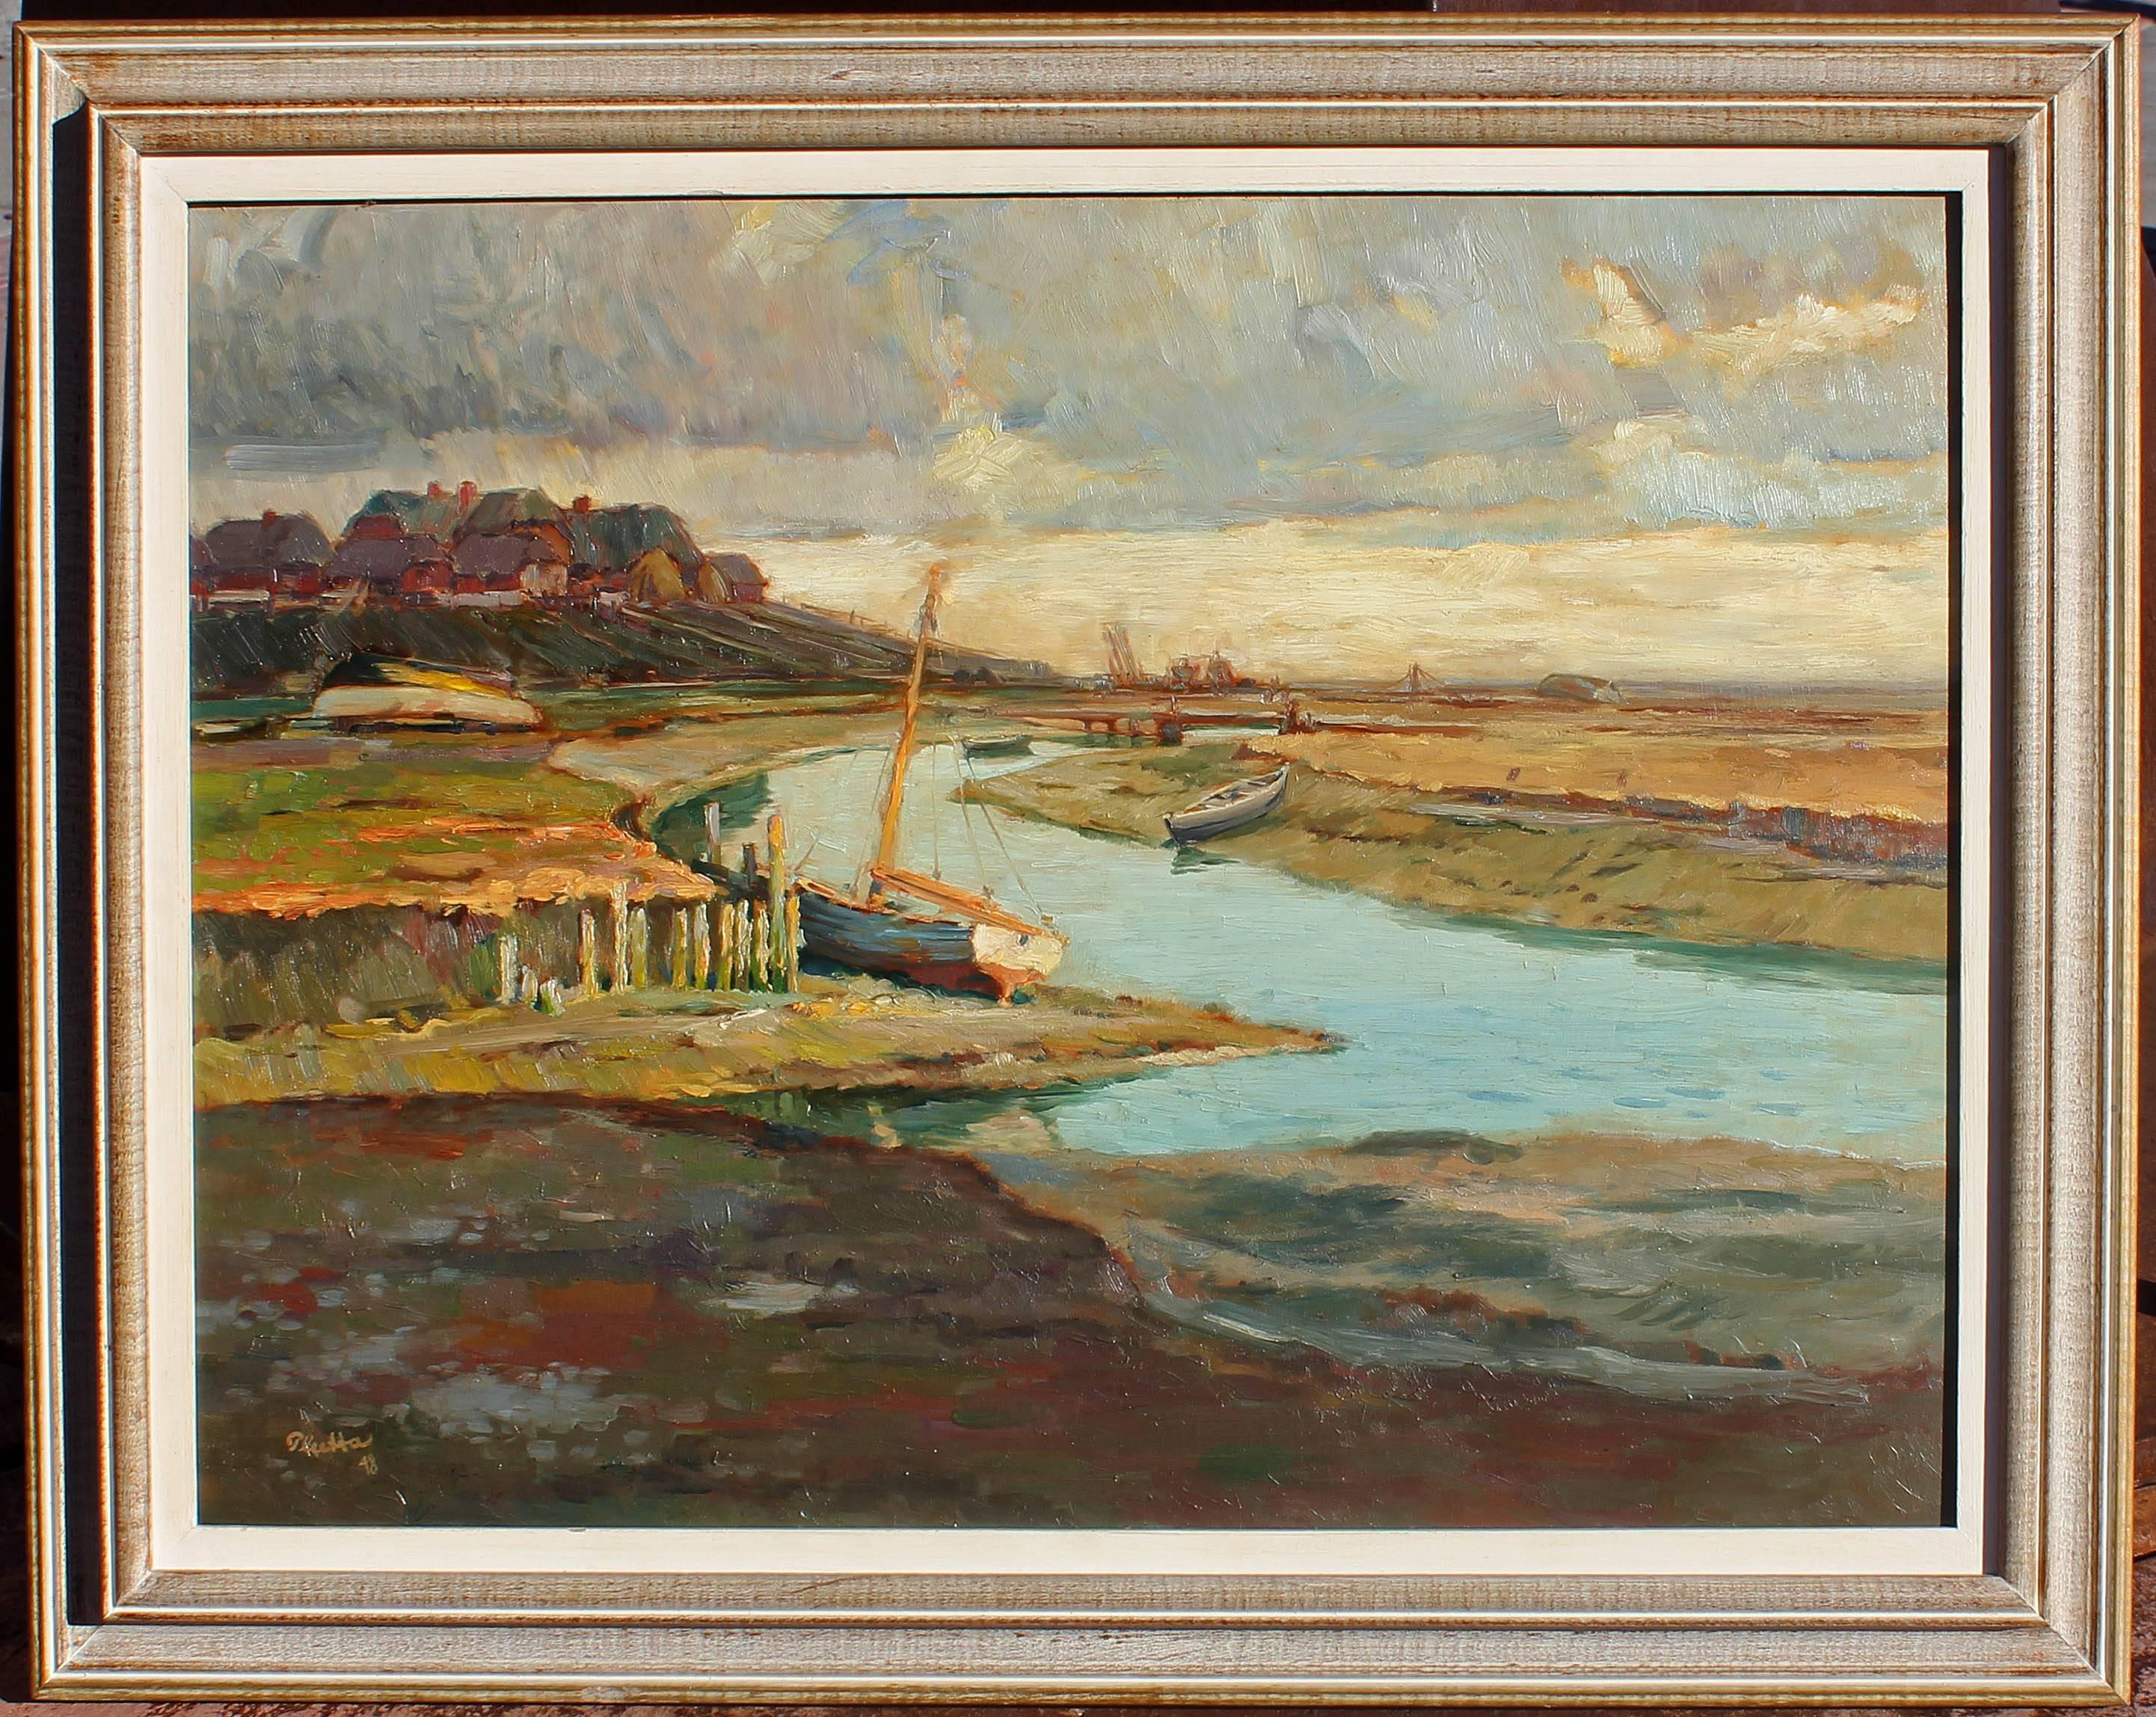 Summer landscape oil painting by Hans Plutta (German 1902-1980). Oil on masonite. Dated 1948. 